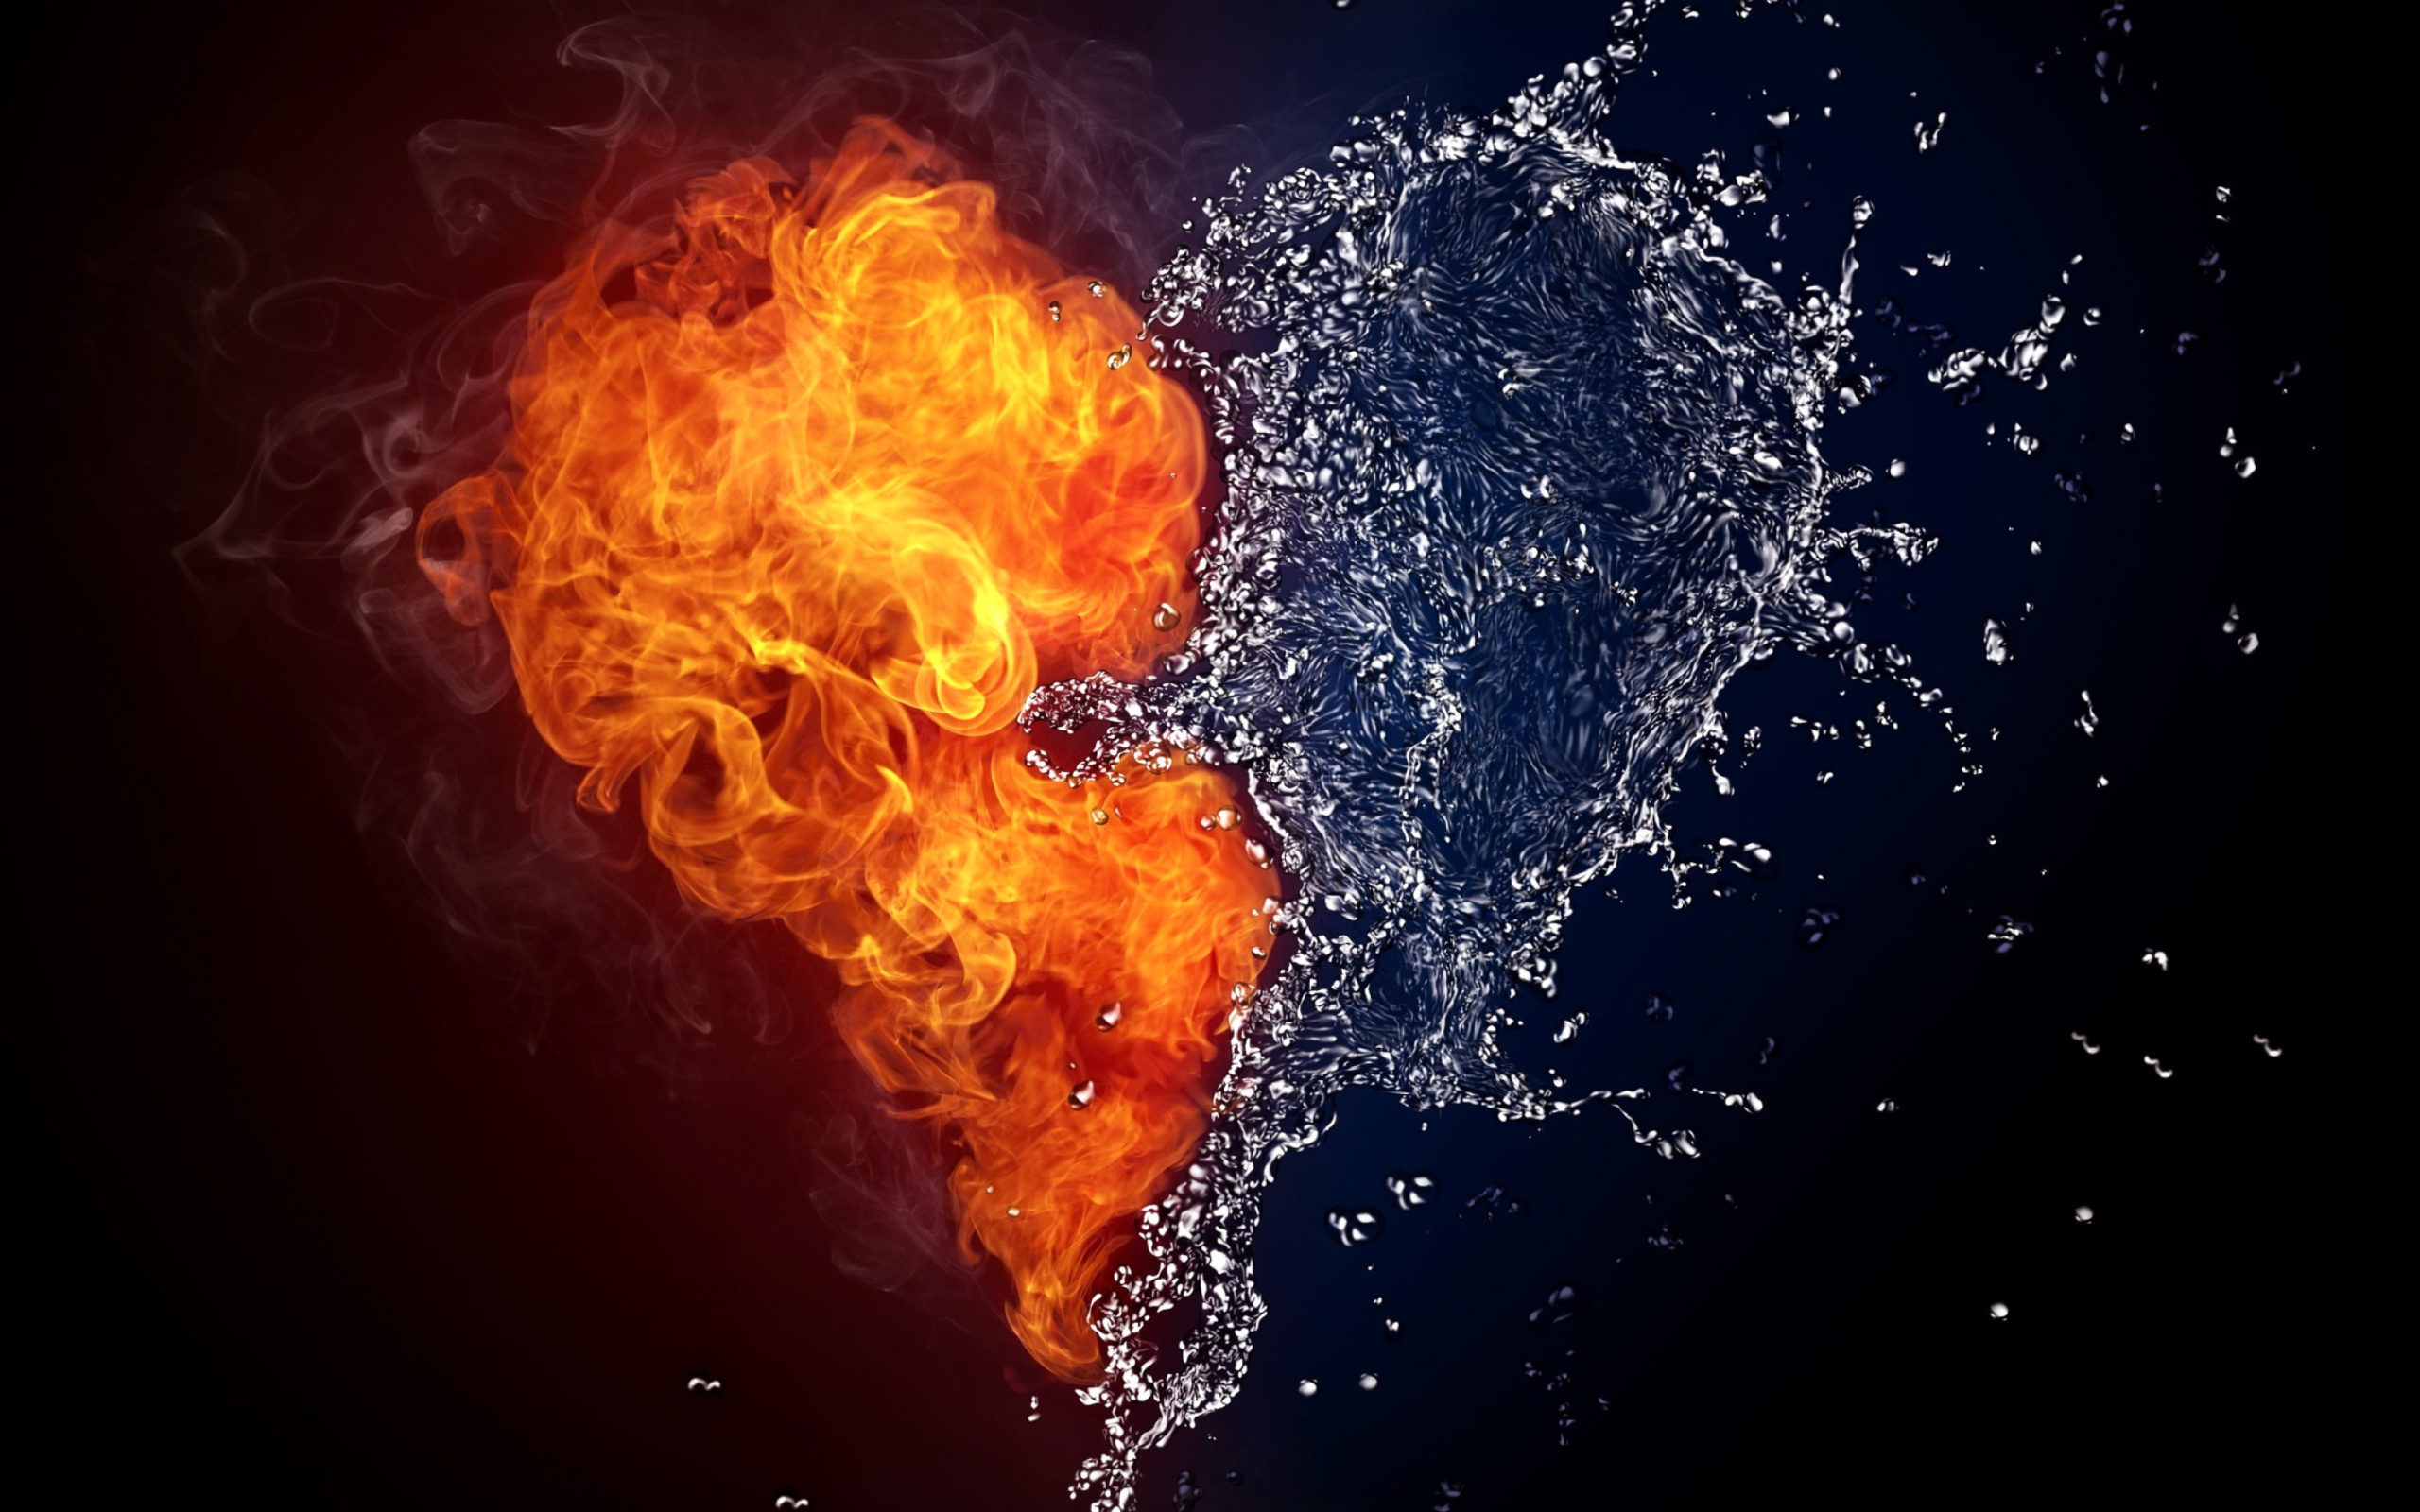 Water and Fire Heart wallpaper 2560x1600